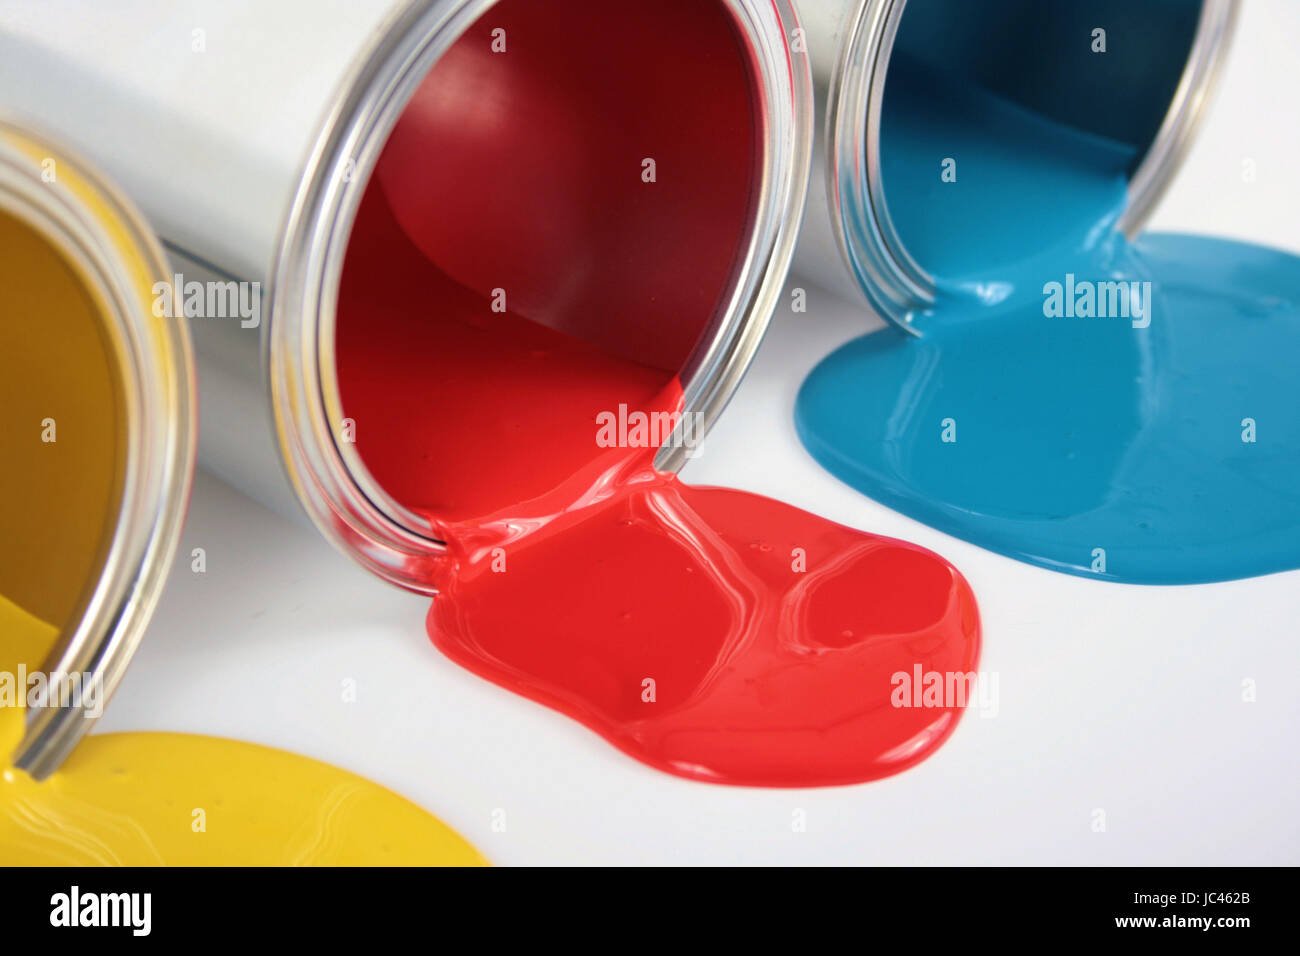 paint cans Stock Photo